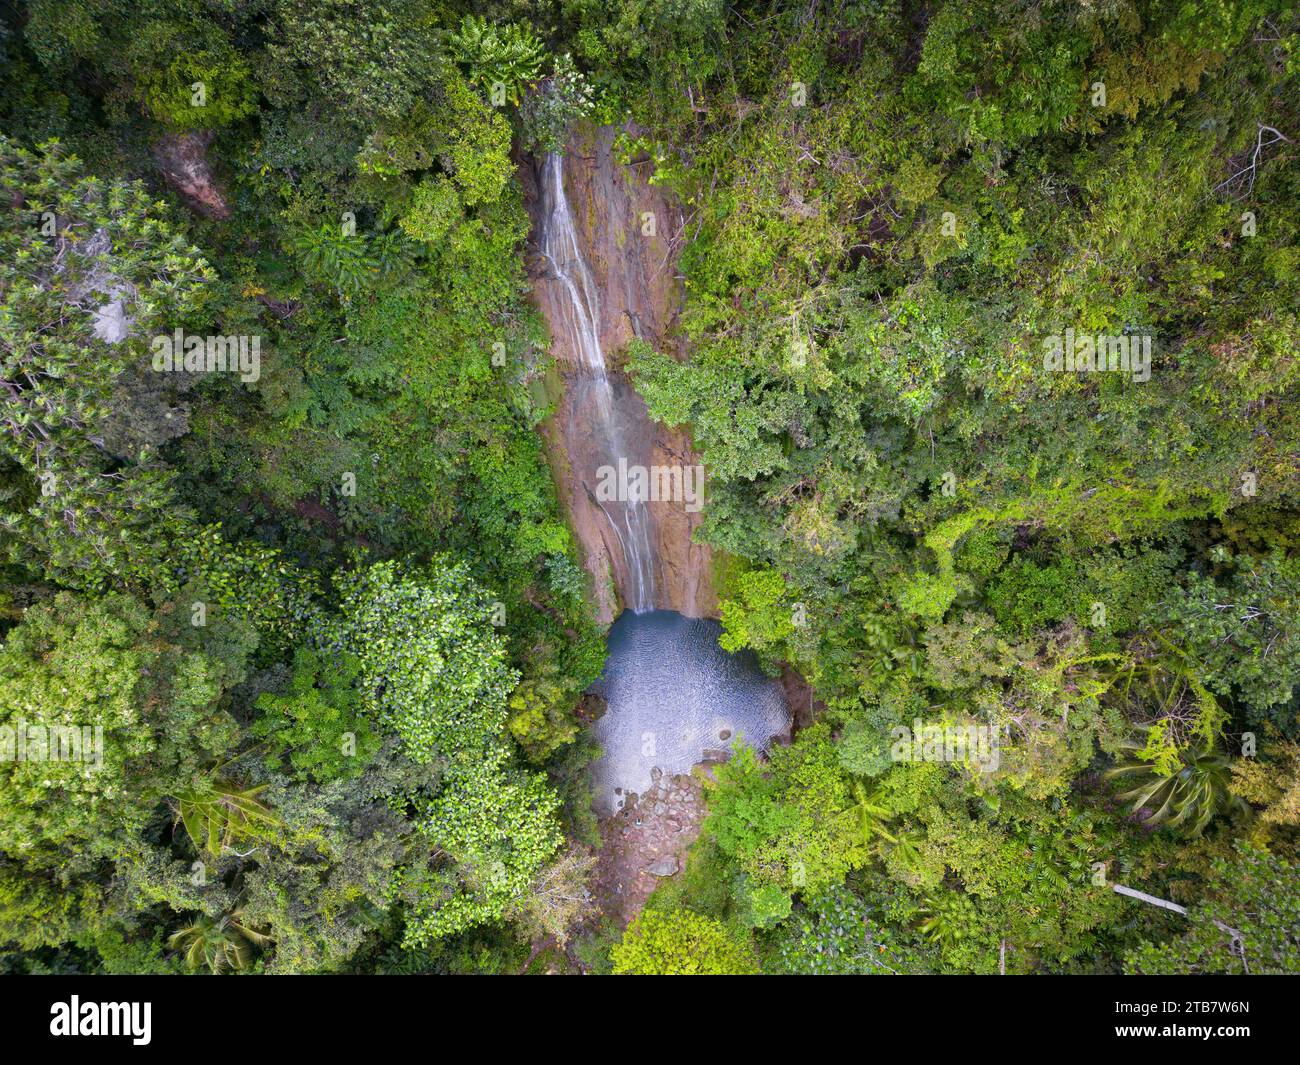 A picturesque creek with Cangbangag Falls, Siquijor, Philippines Stock Photo